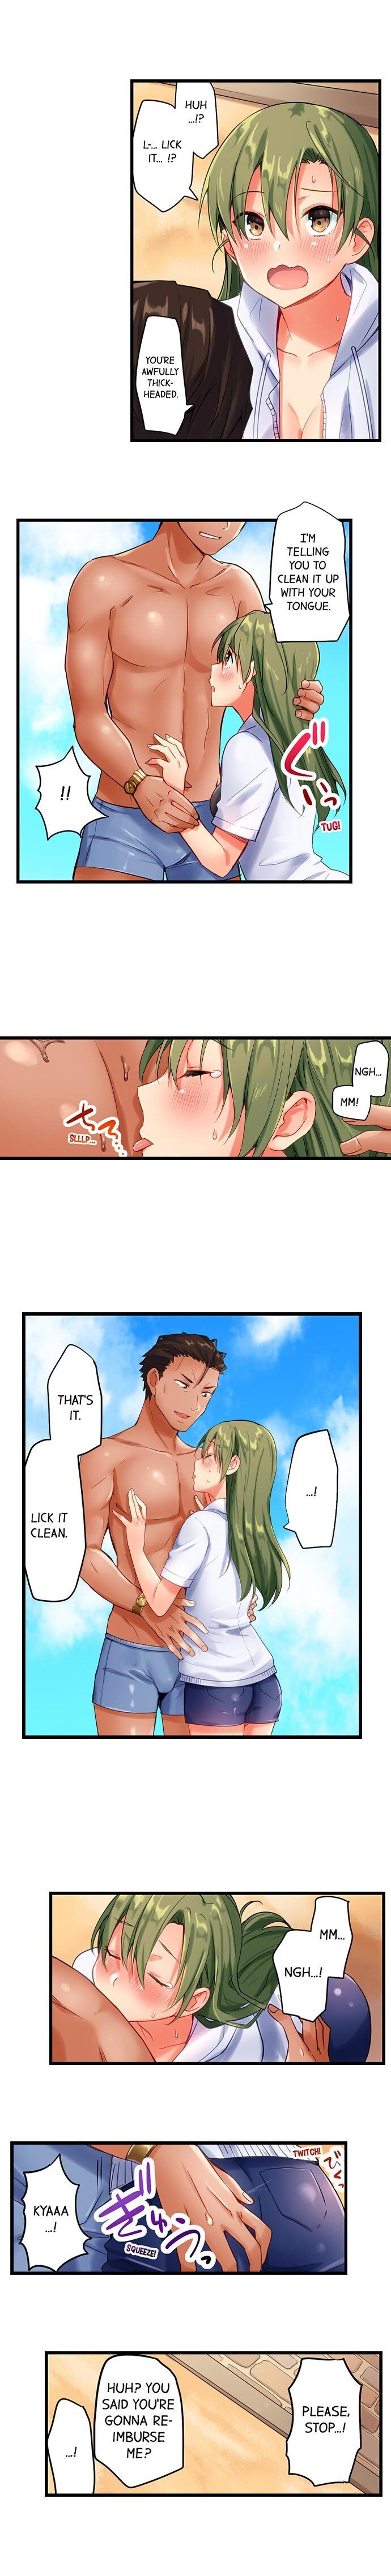 A Chaste Girl’s Climax at a Nudist Beach - Chapter 7 Page 7